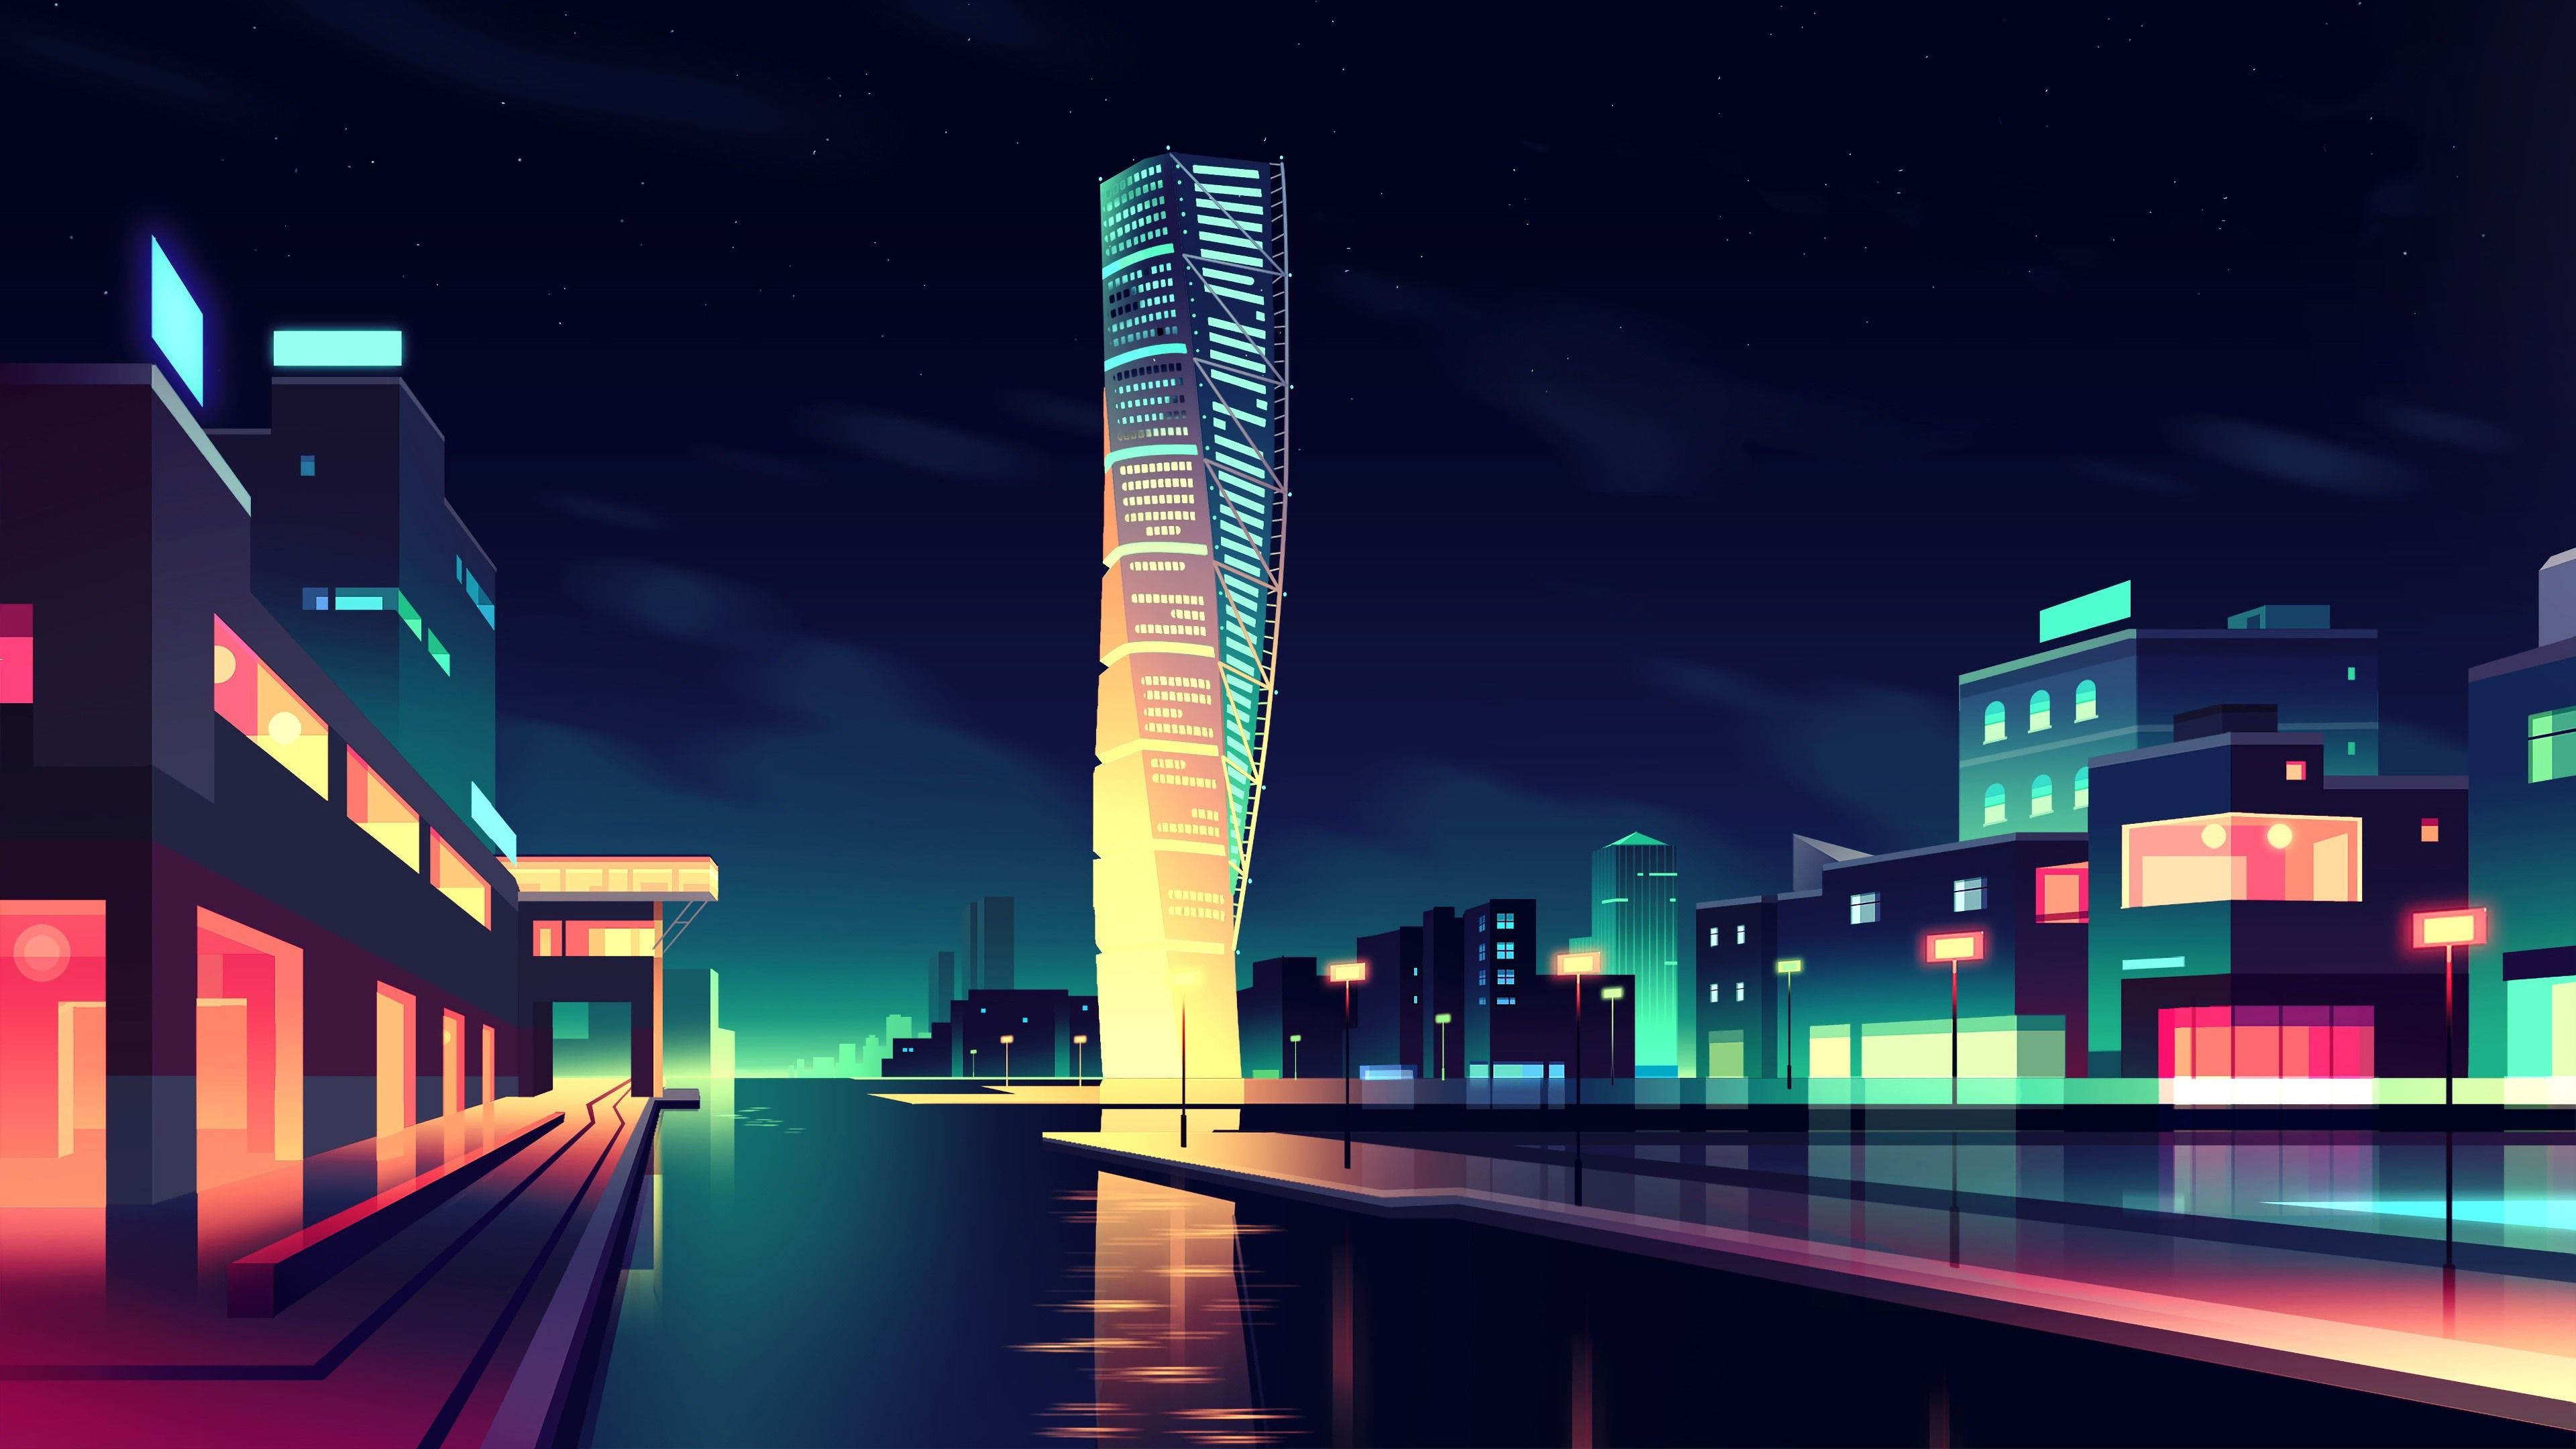 Wallpaper Vector picture, city, skyscrapers, colors, night 3840x2160 UHD 4K Picture, Image